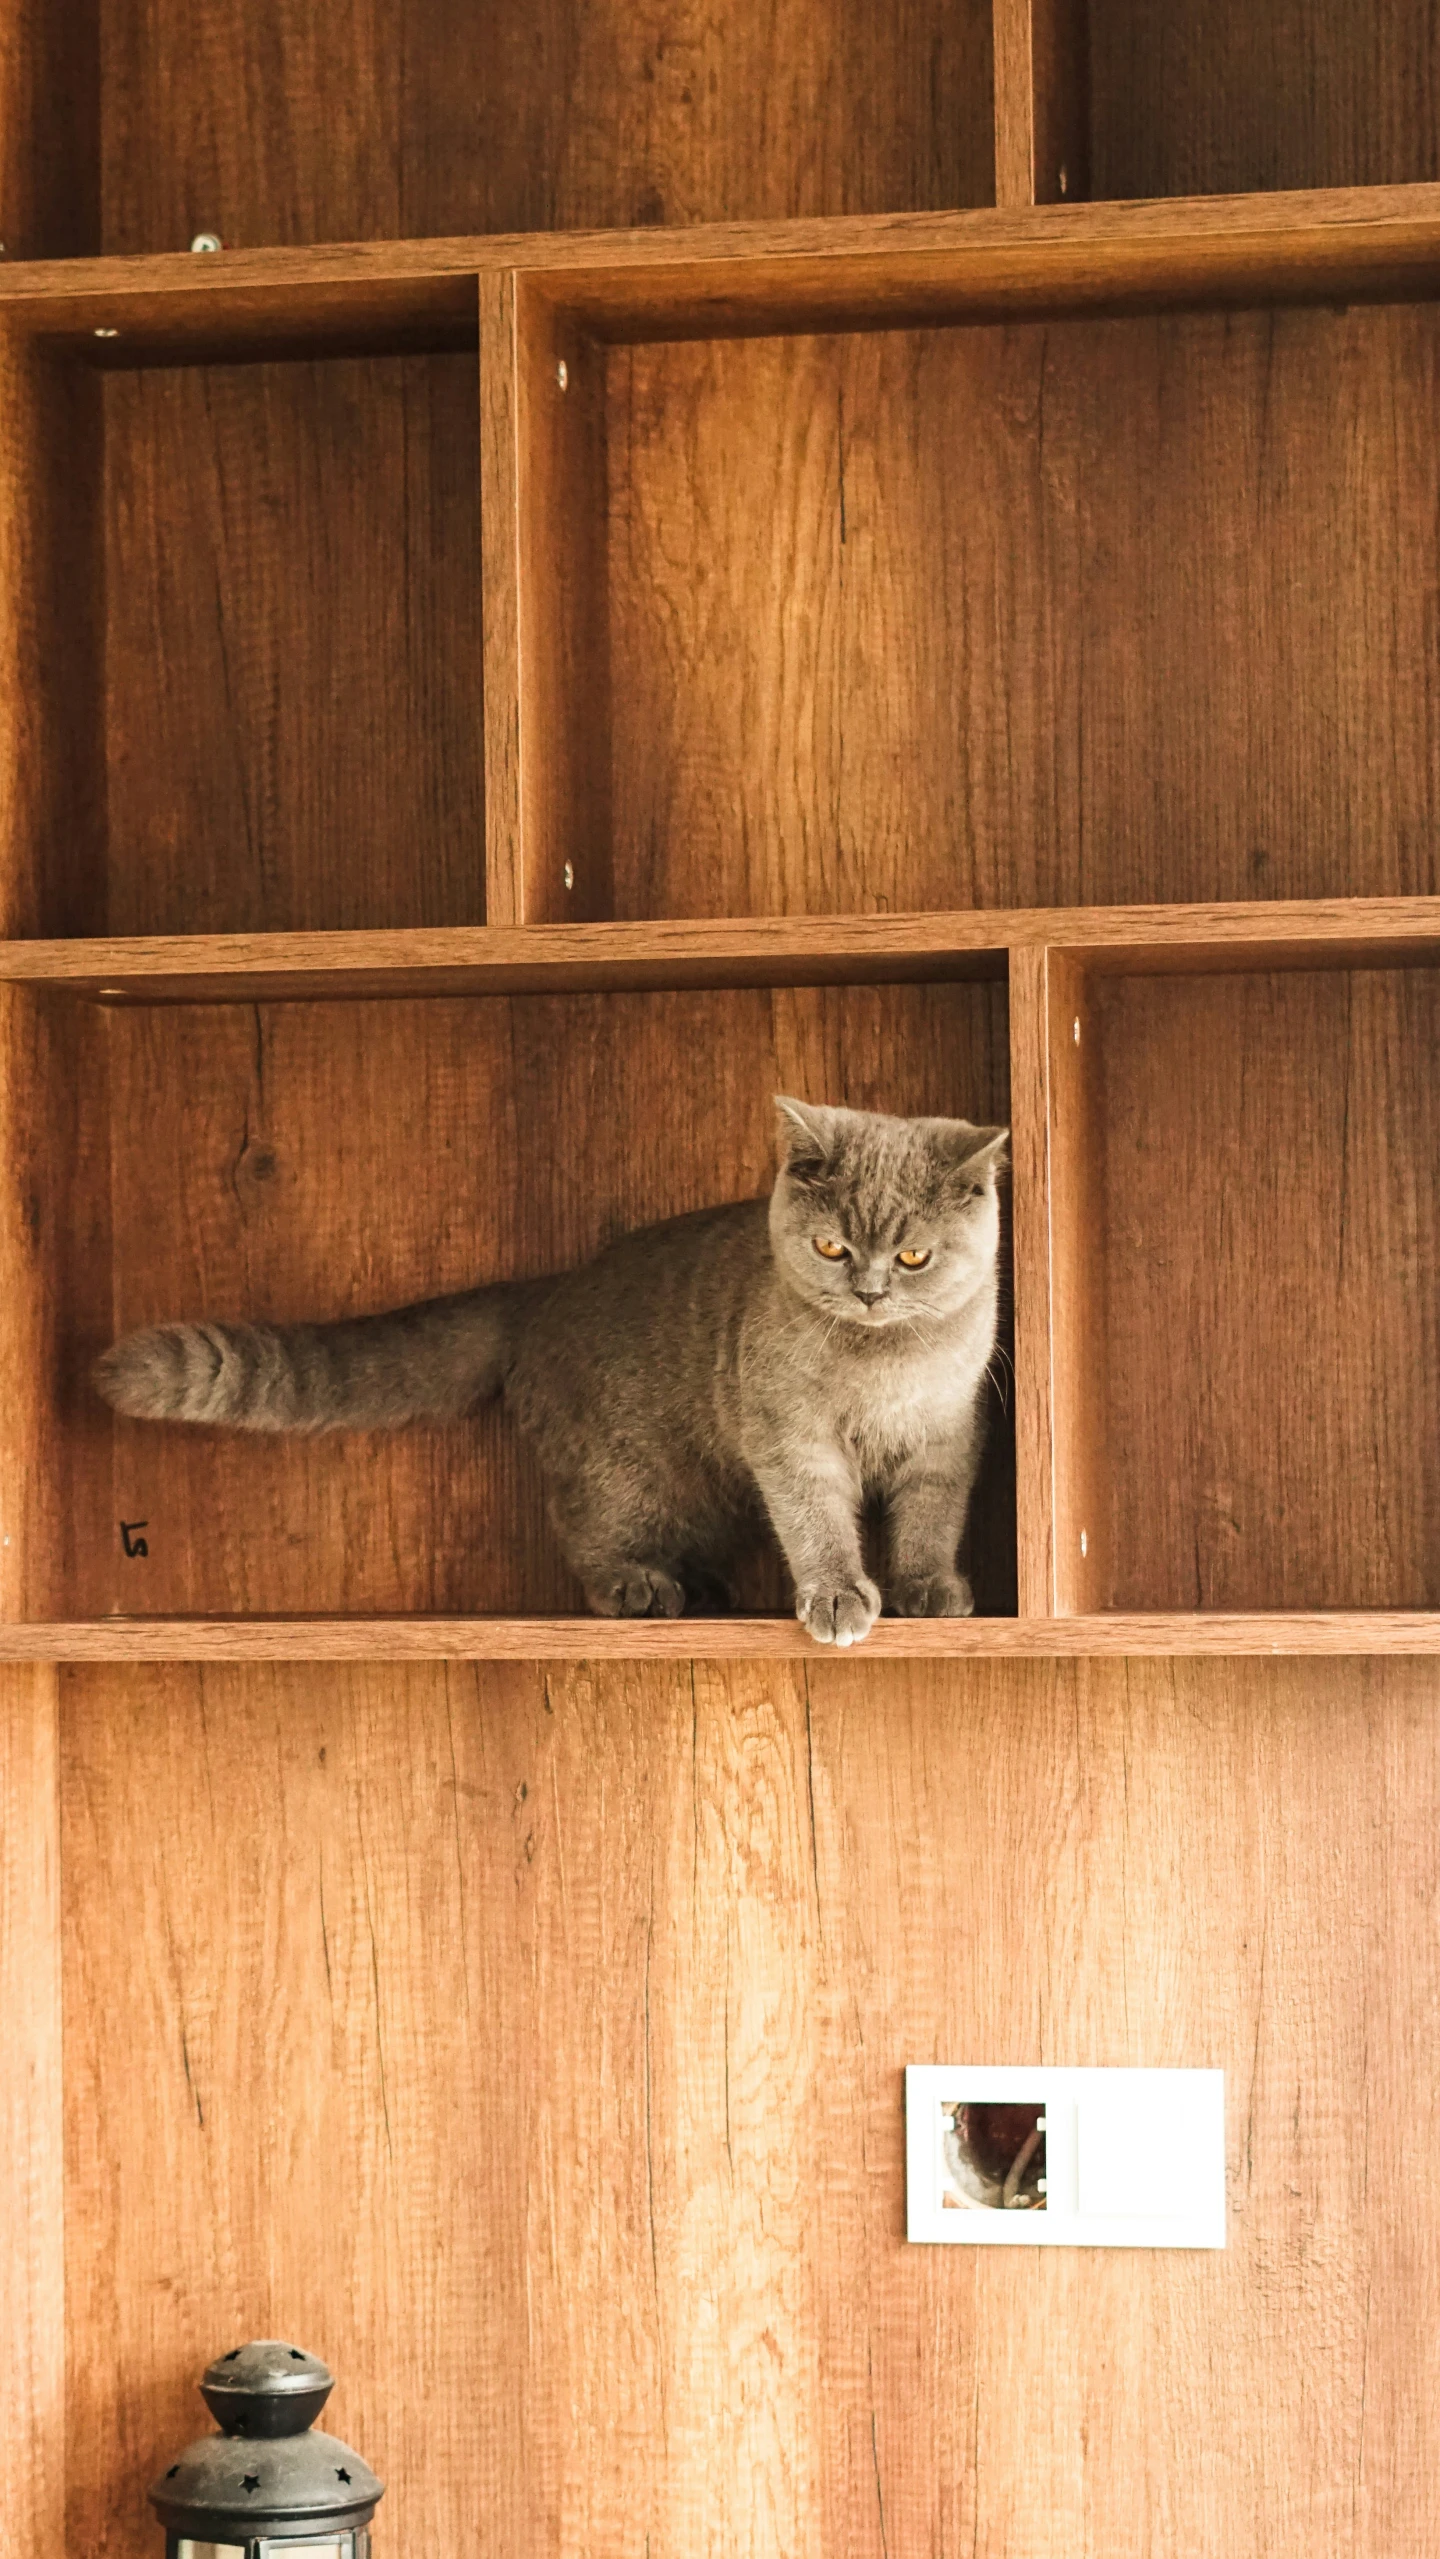 there is a cat sitting in a wooden bookcase